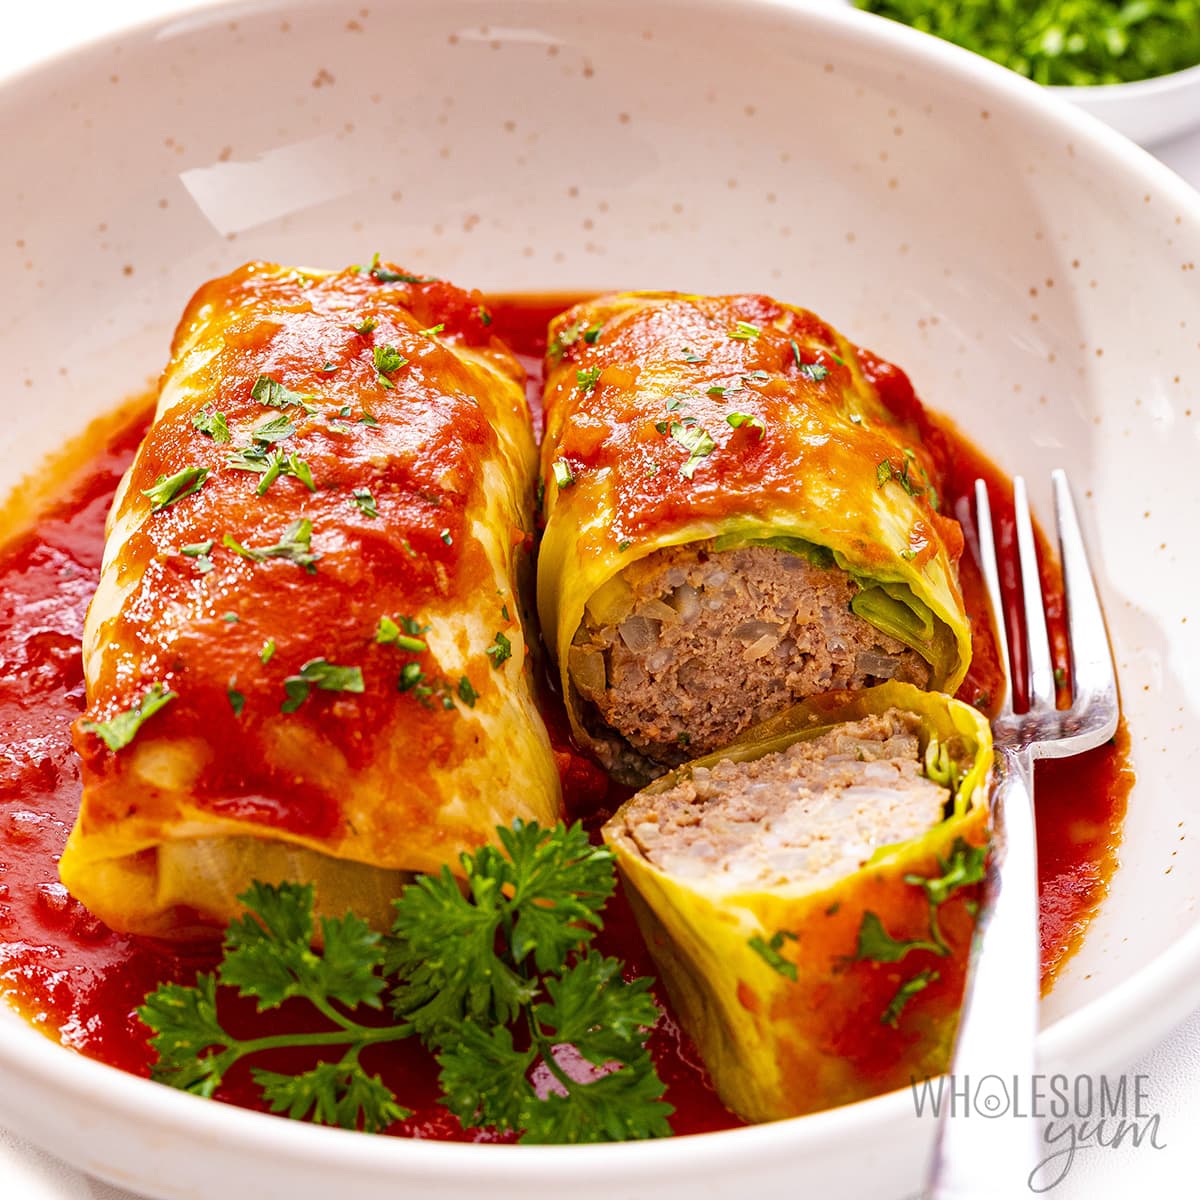 Stuffed cabbage rolls on a plate with a fork.